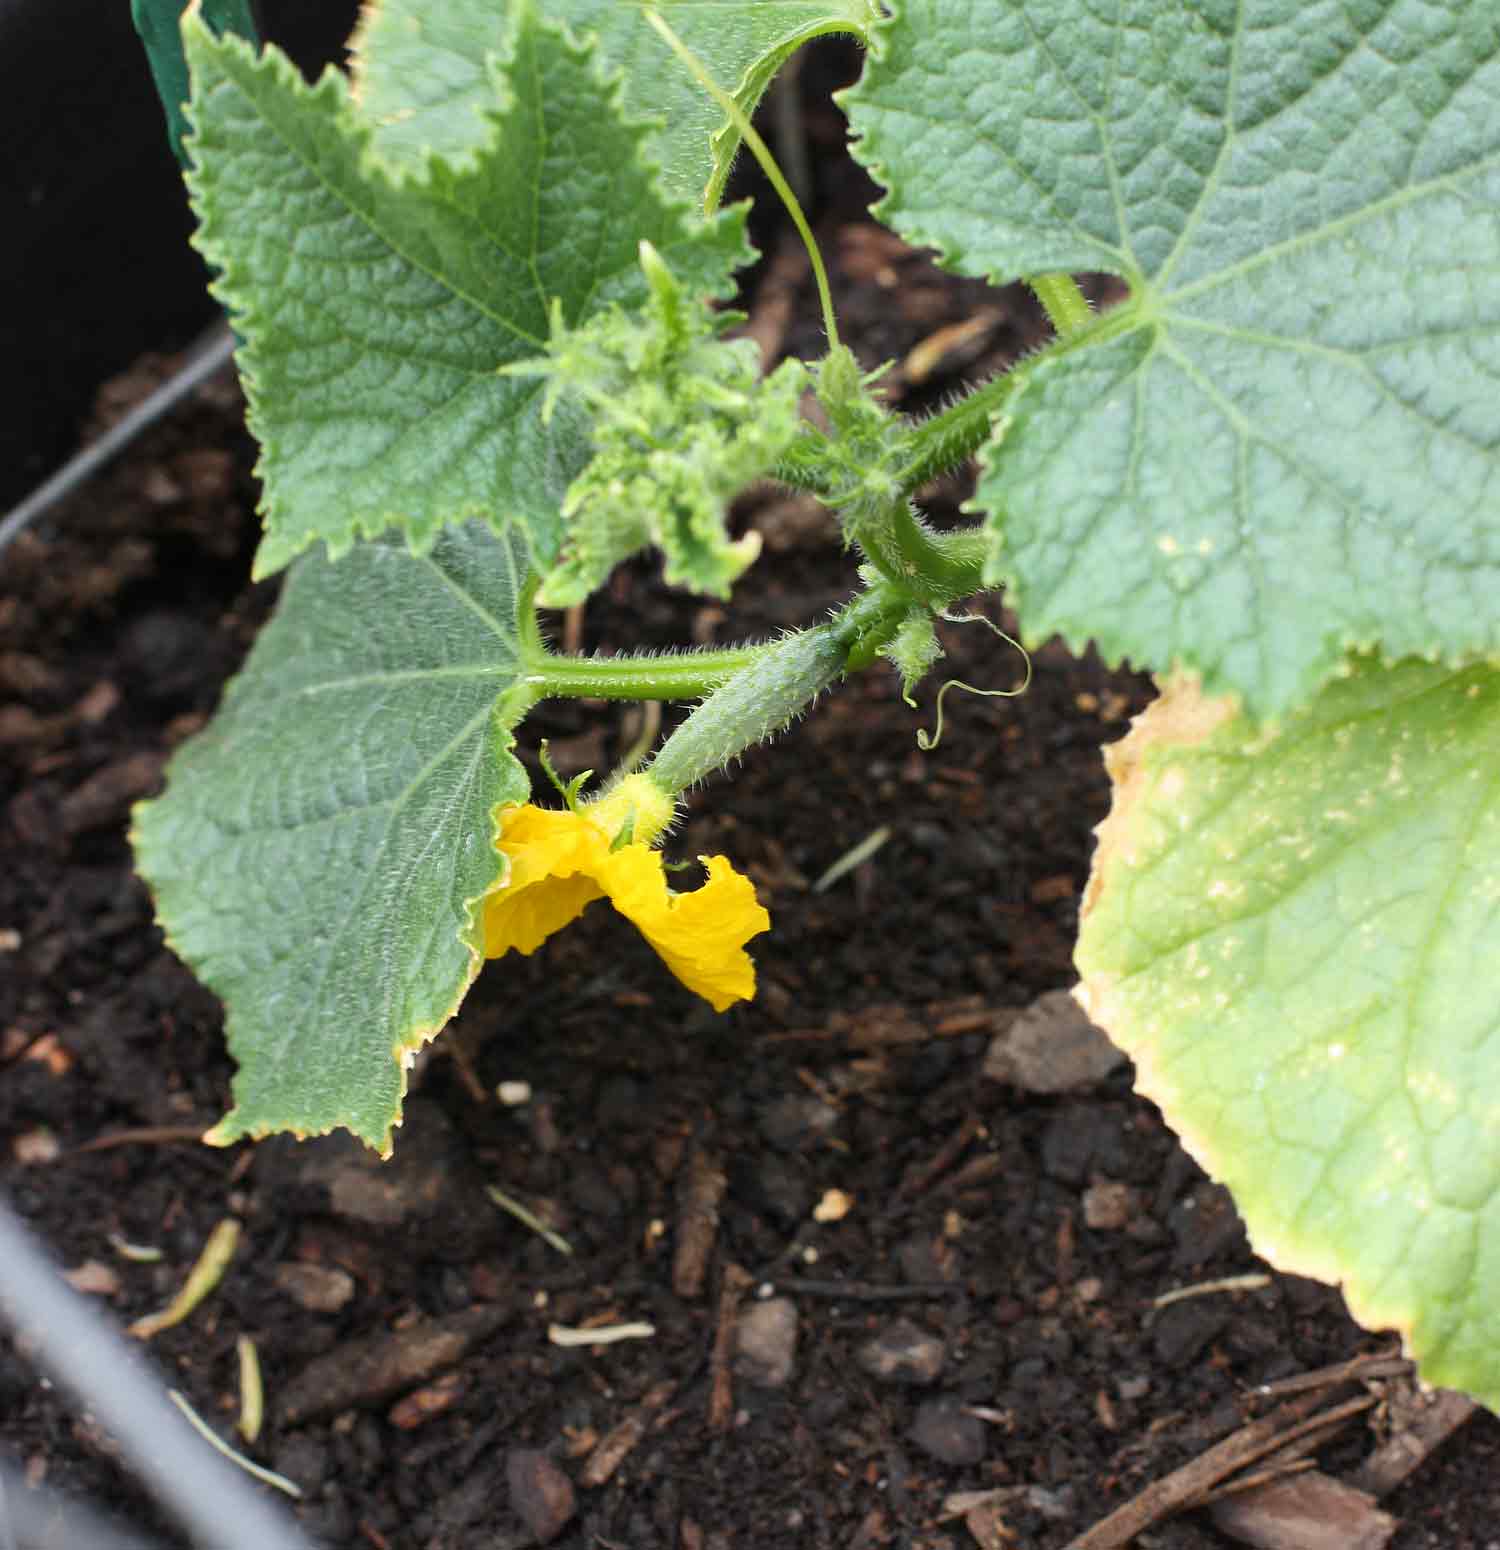 Tiny cucumber on plant with flower still attached.